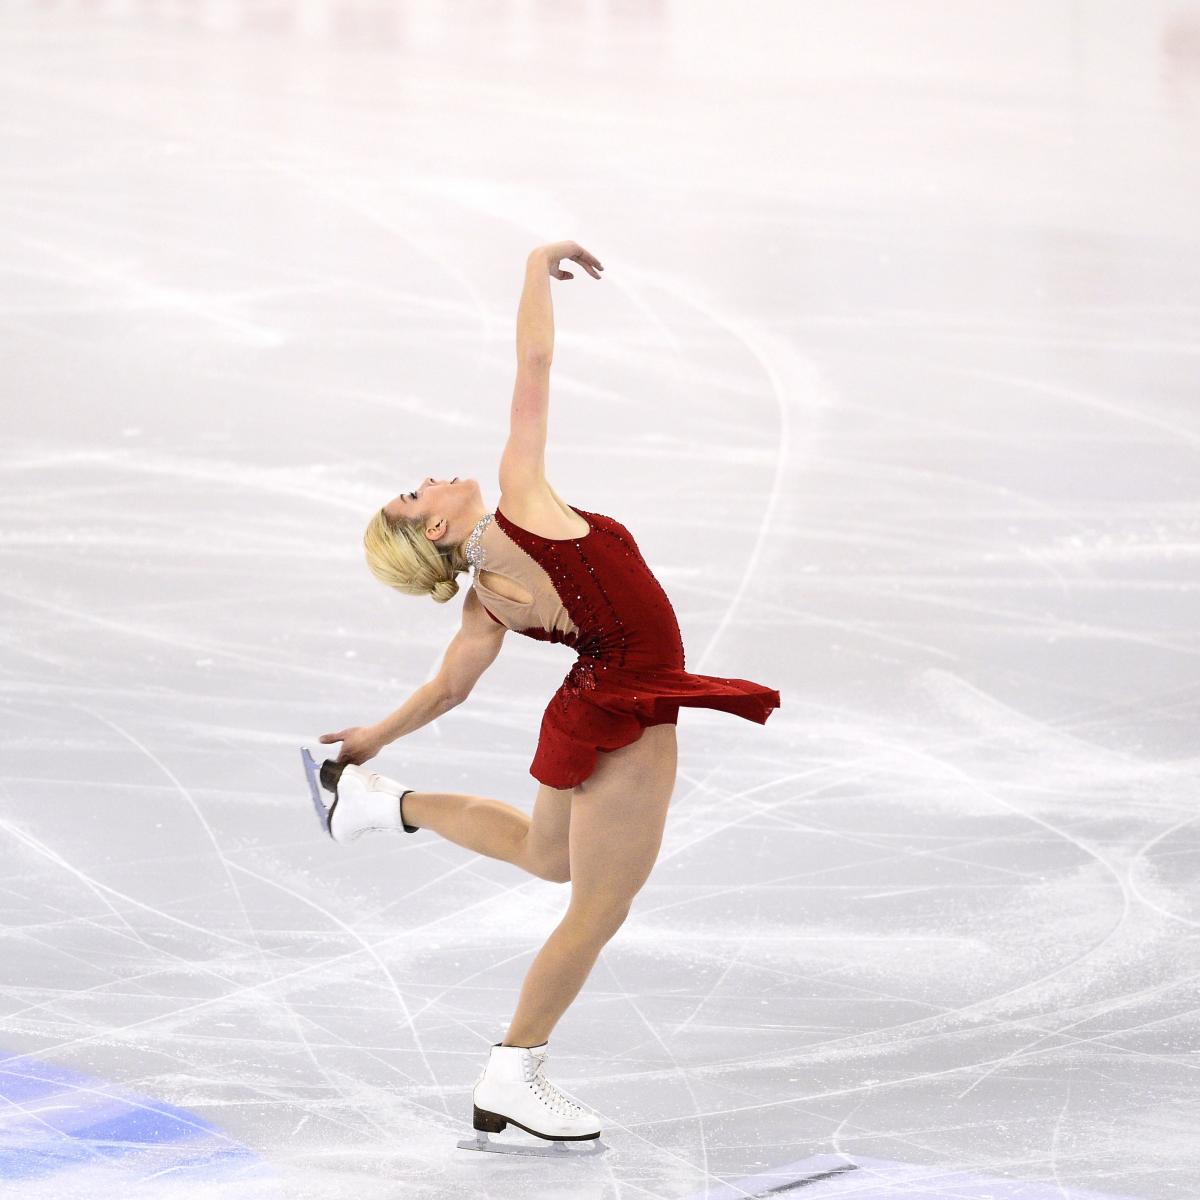 US Figure Skating Championships 2016 TV Schedule, Top Contenders and